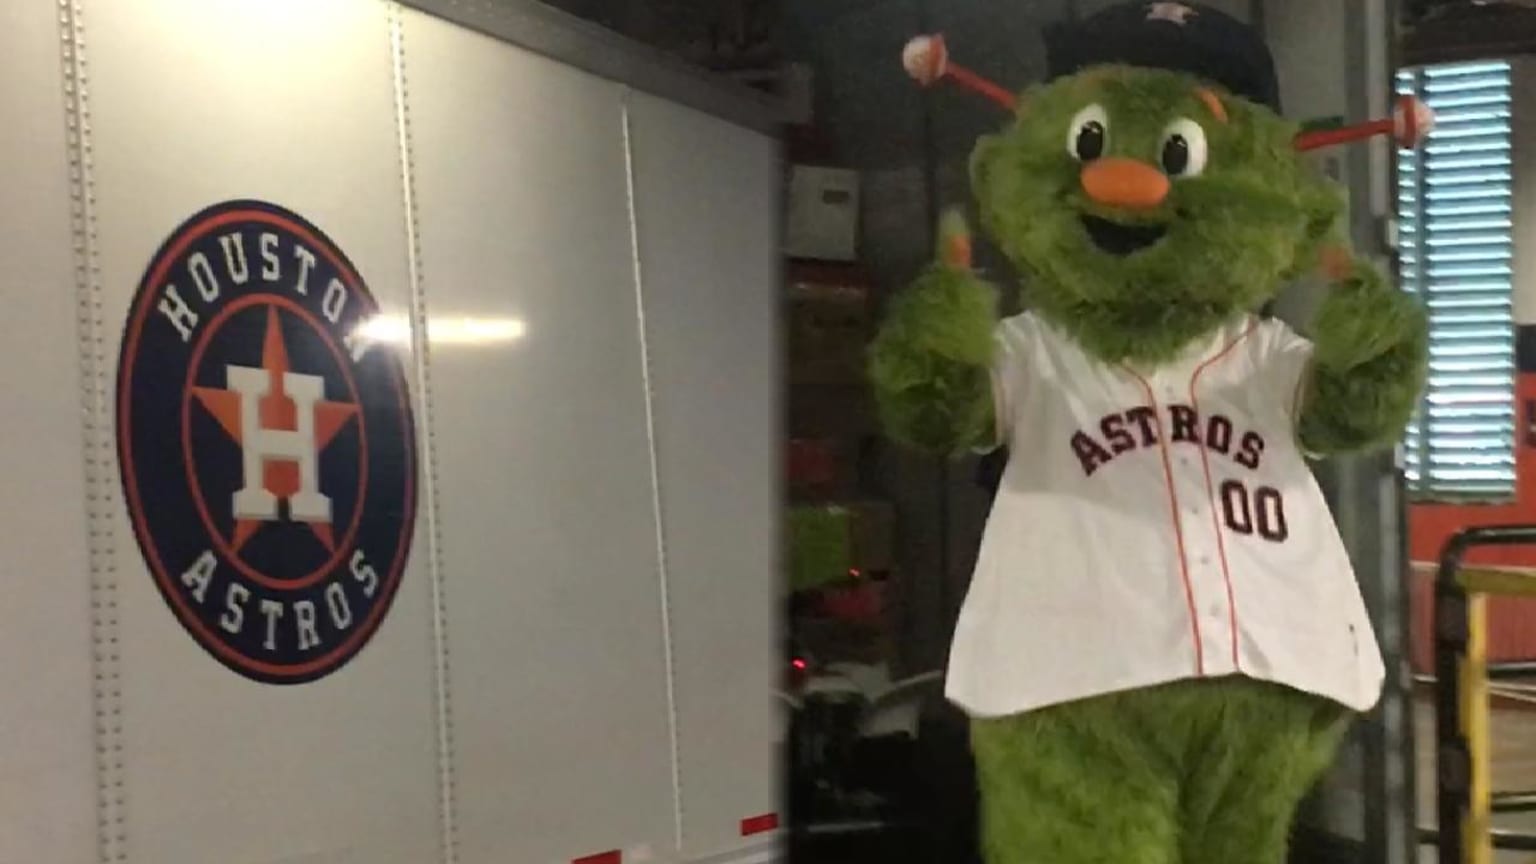 Astros Mascot,Orbit holding a flag while standing on - Depop